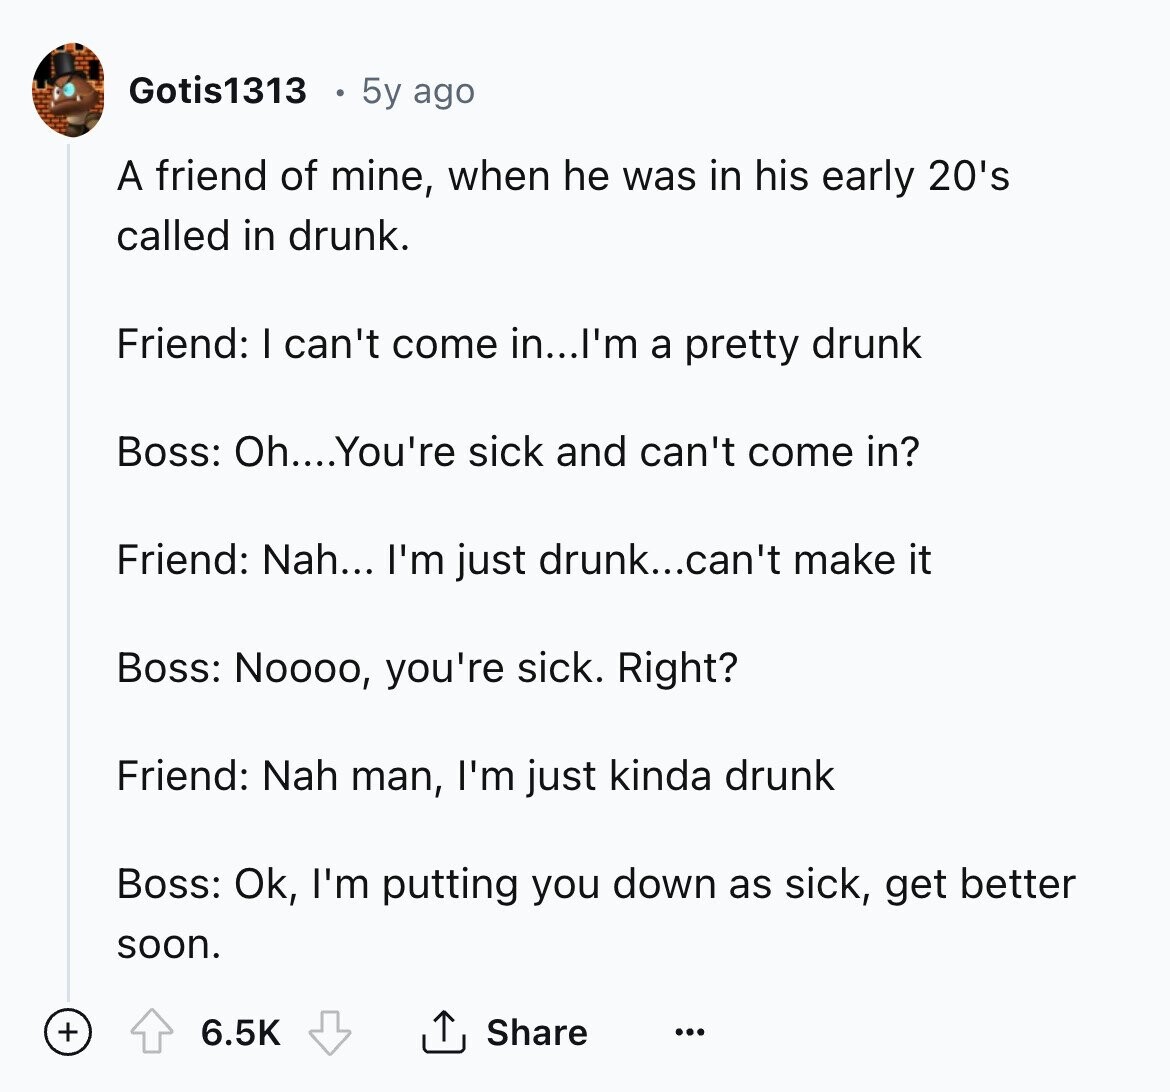 Gotis1313 5y ago A friend of mine, when he was in his early 20's called in drunk. Friend: I can't come in...I'm a pretty drunk Boss: Oh....You're sick and can't come in? Friend: Nah... I'm just drunk...can't make it Boss: Noooo, you're sick. Right? Friend: Nah man, I'm just kinda drunk Boss: Ok, I'm putting you down as sick, get better soon. + Share 6.5K ... 